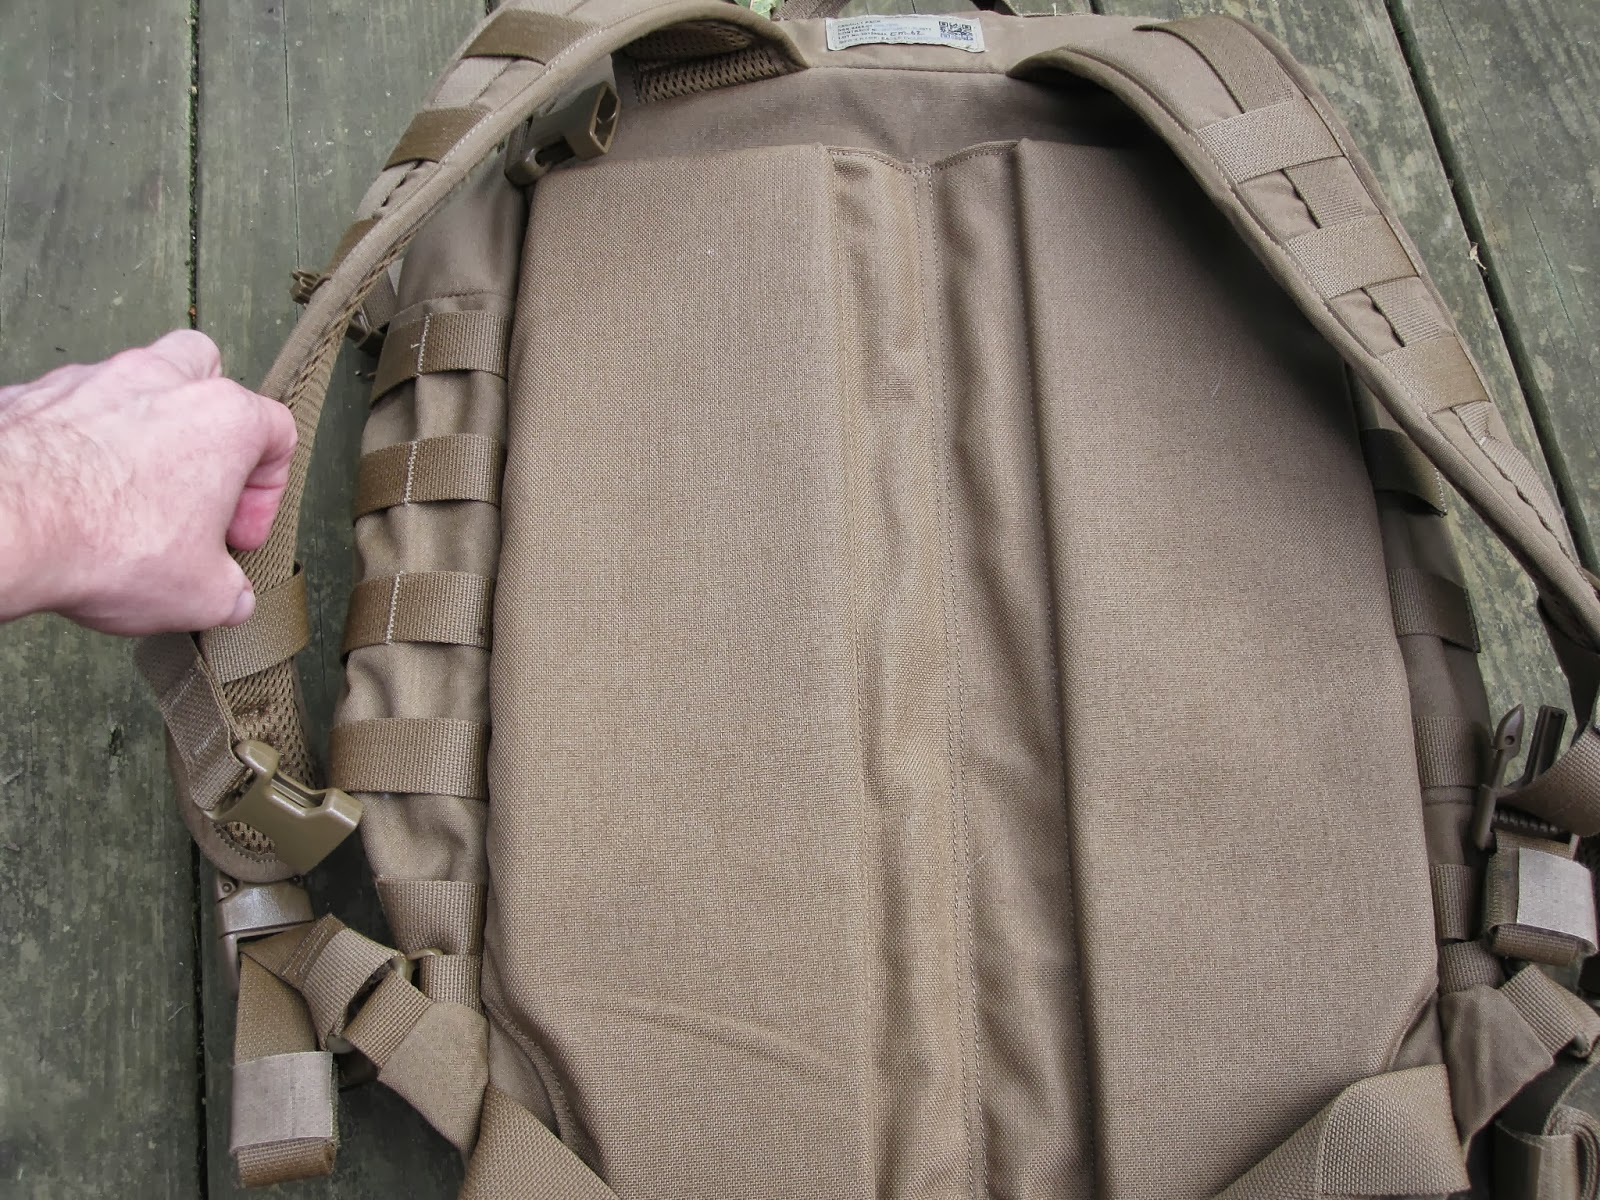 The Outdoor Gear Review: FILBE Assault Pack Review